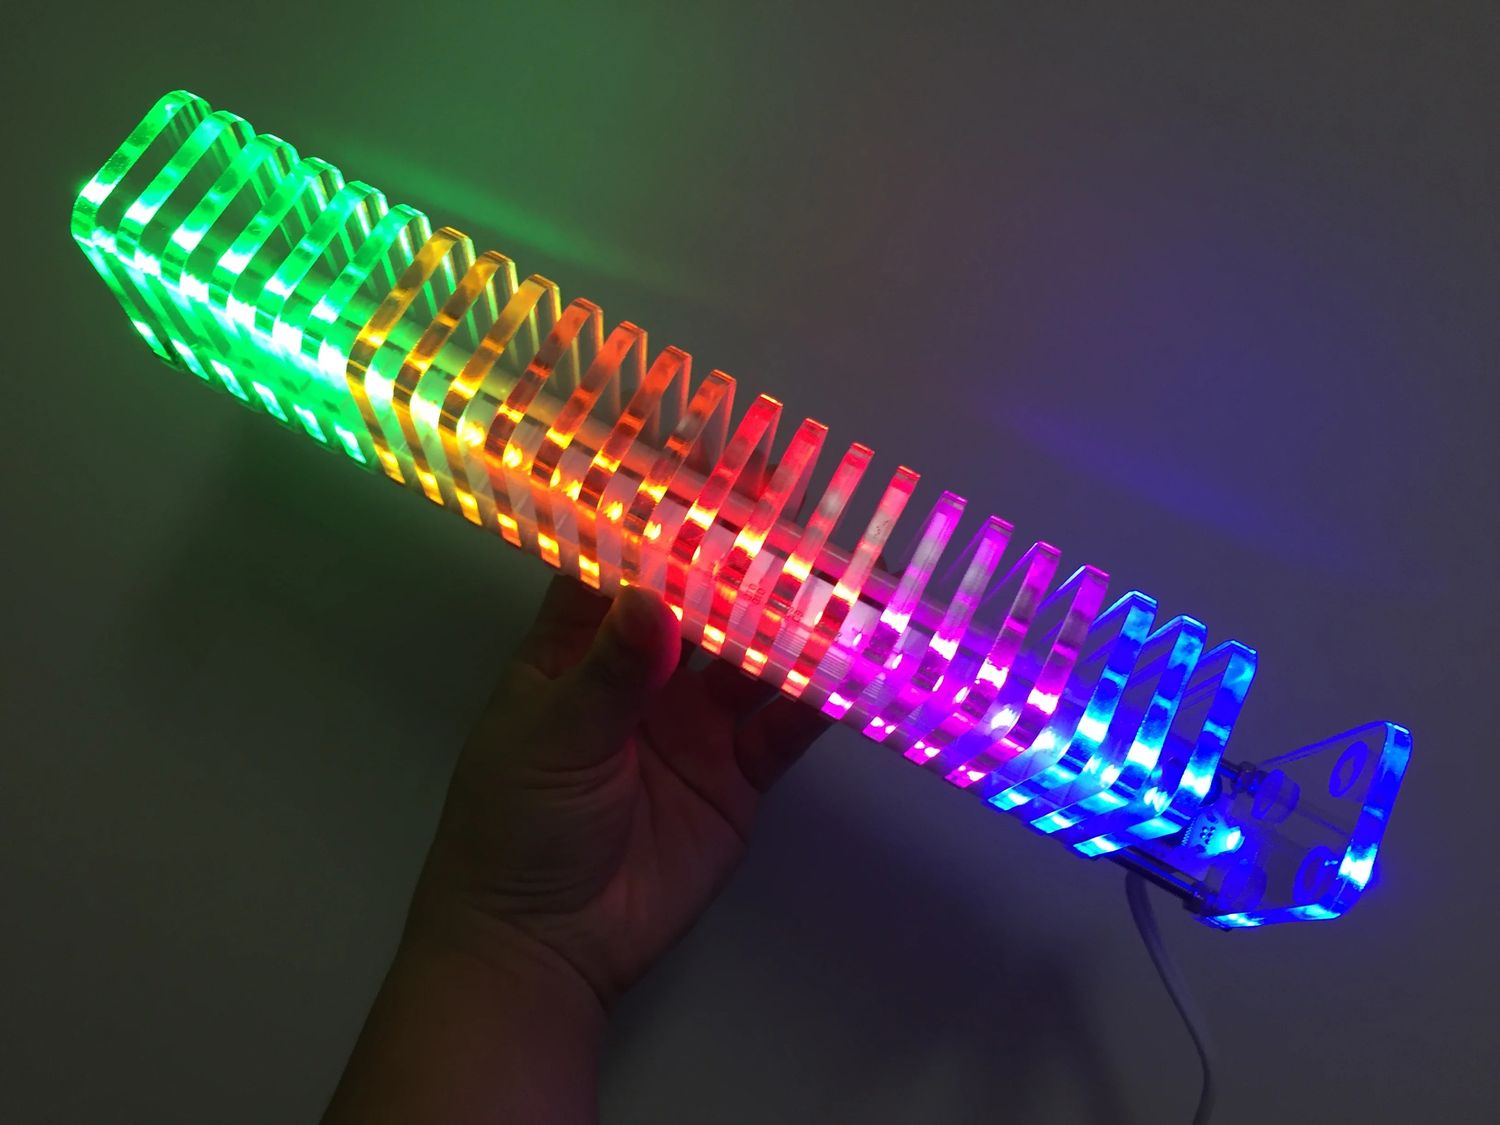 How To Make A 7-Band Digital Music Spectrum Analyzer With LED Strips